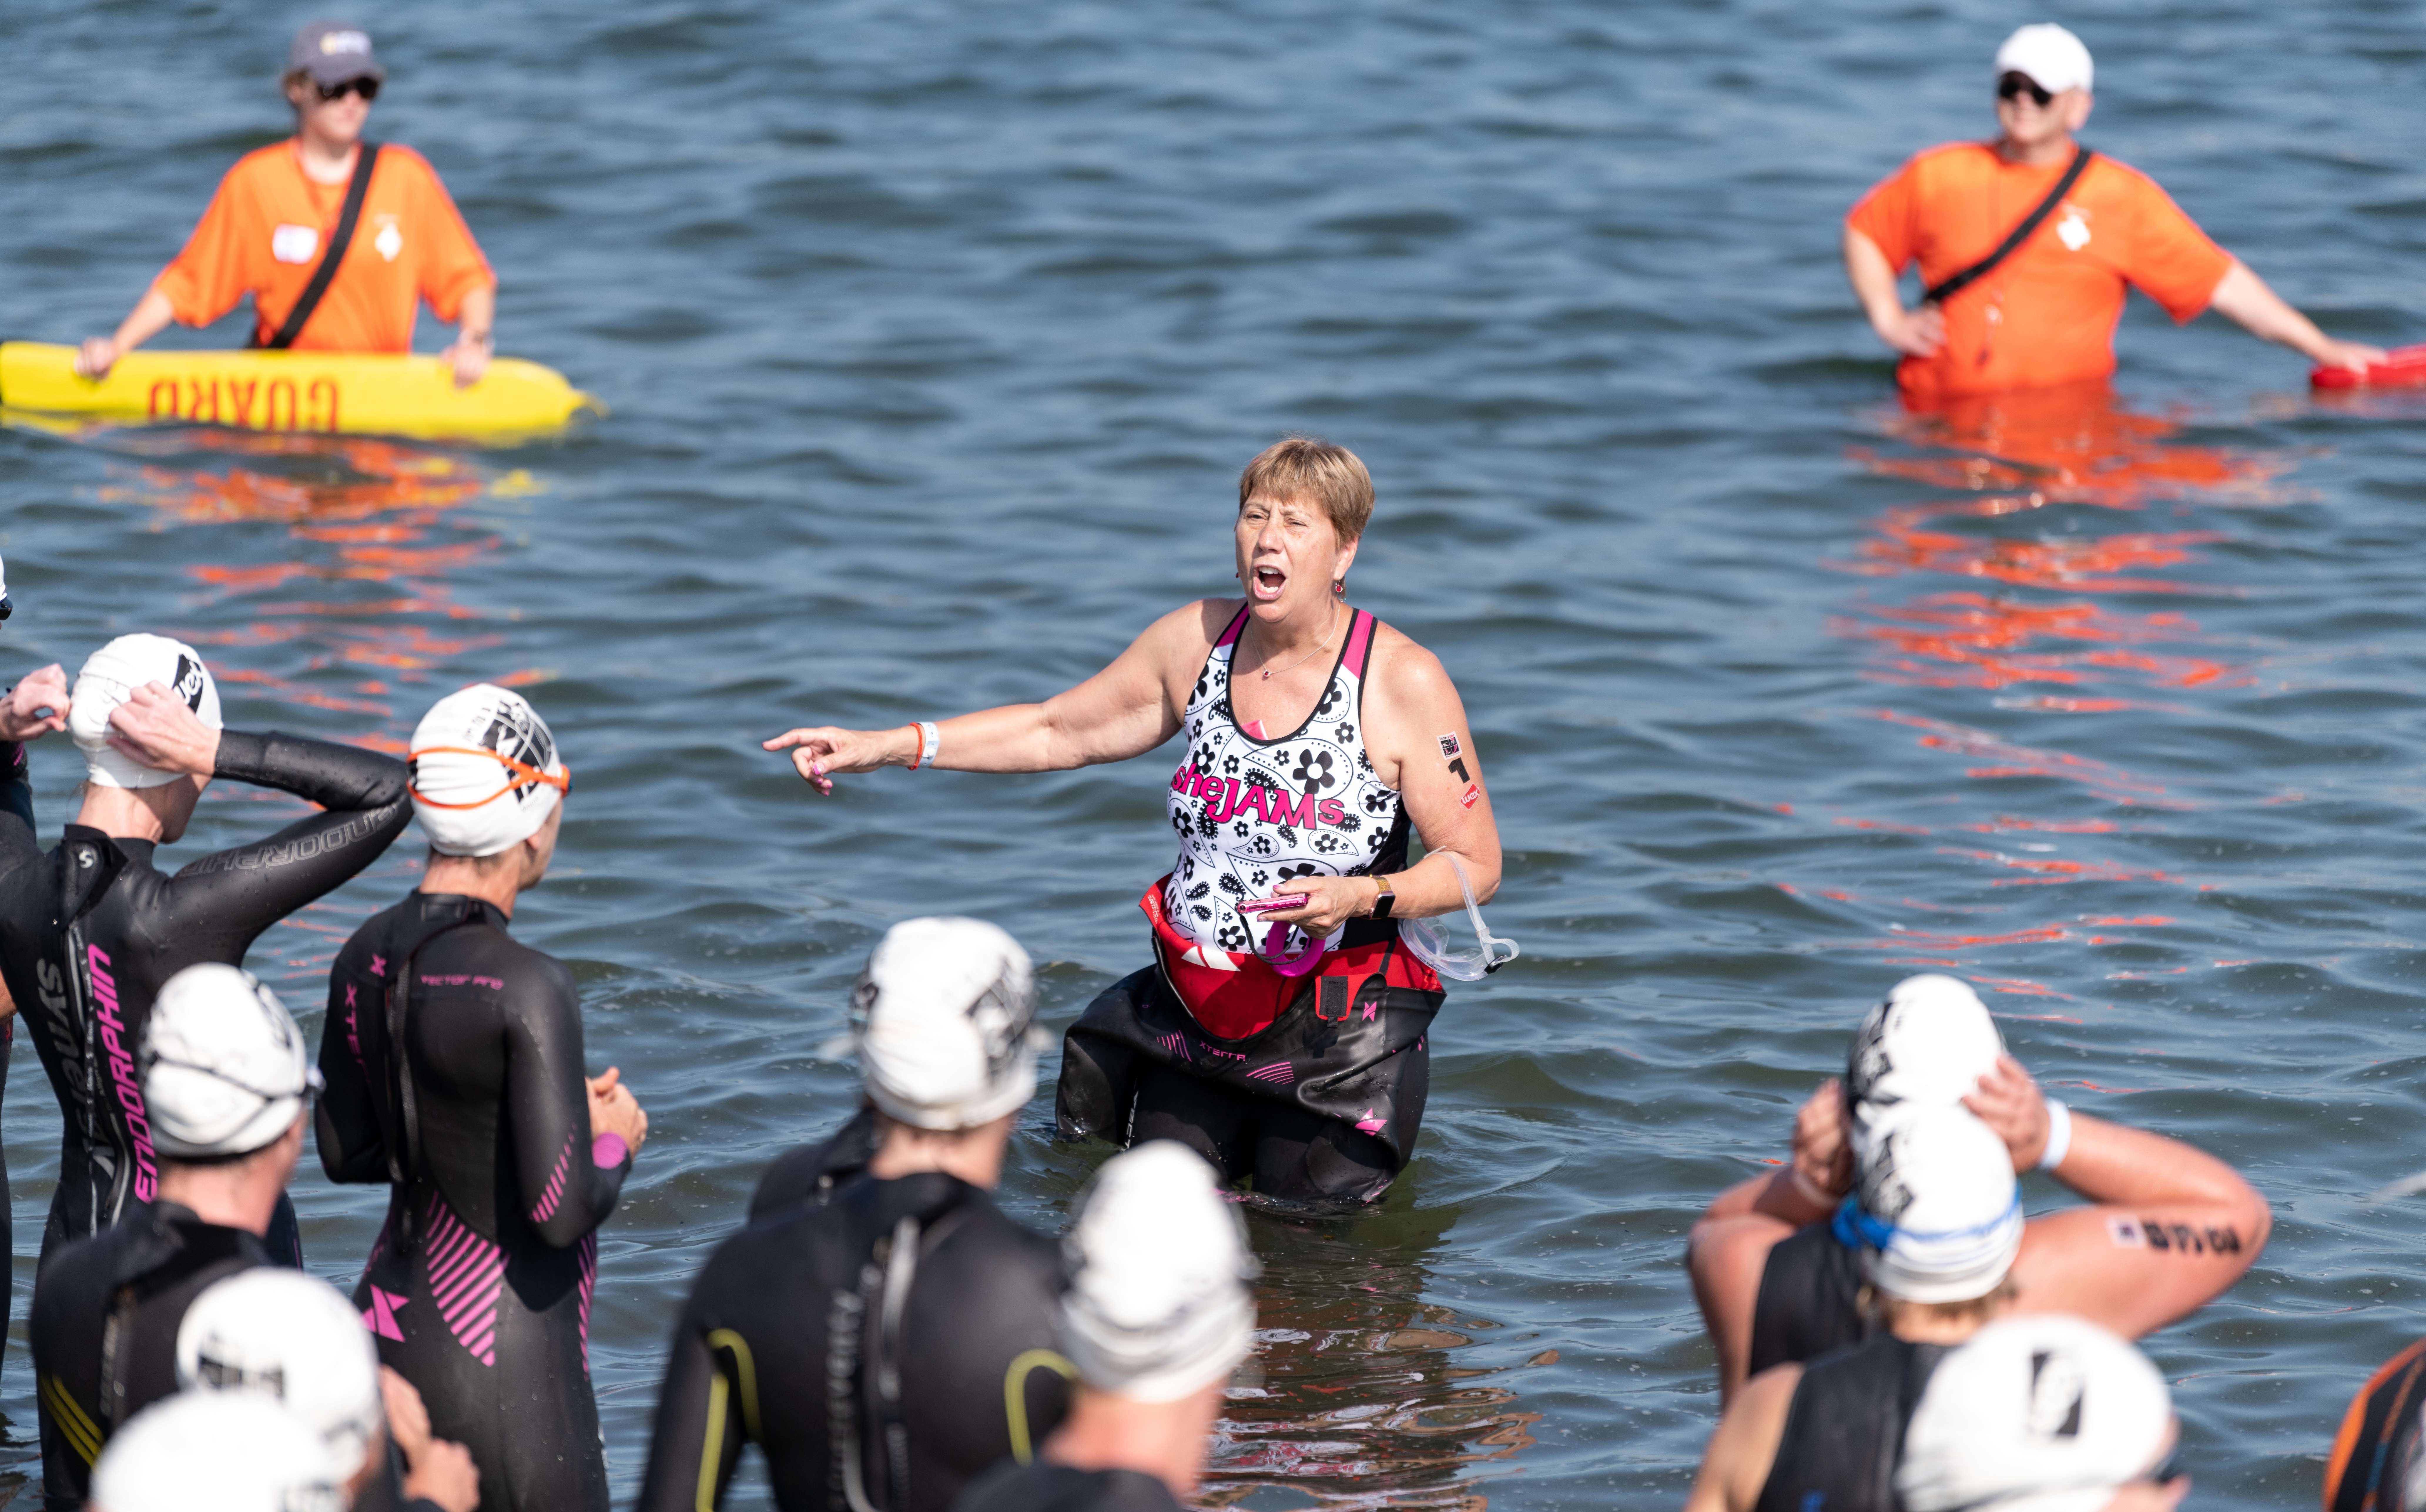 Tri for a Cure athletes in the water